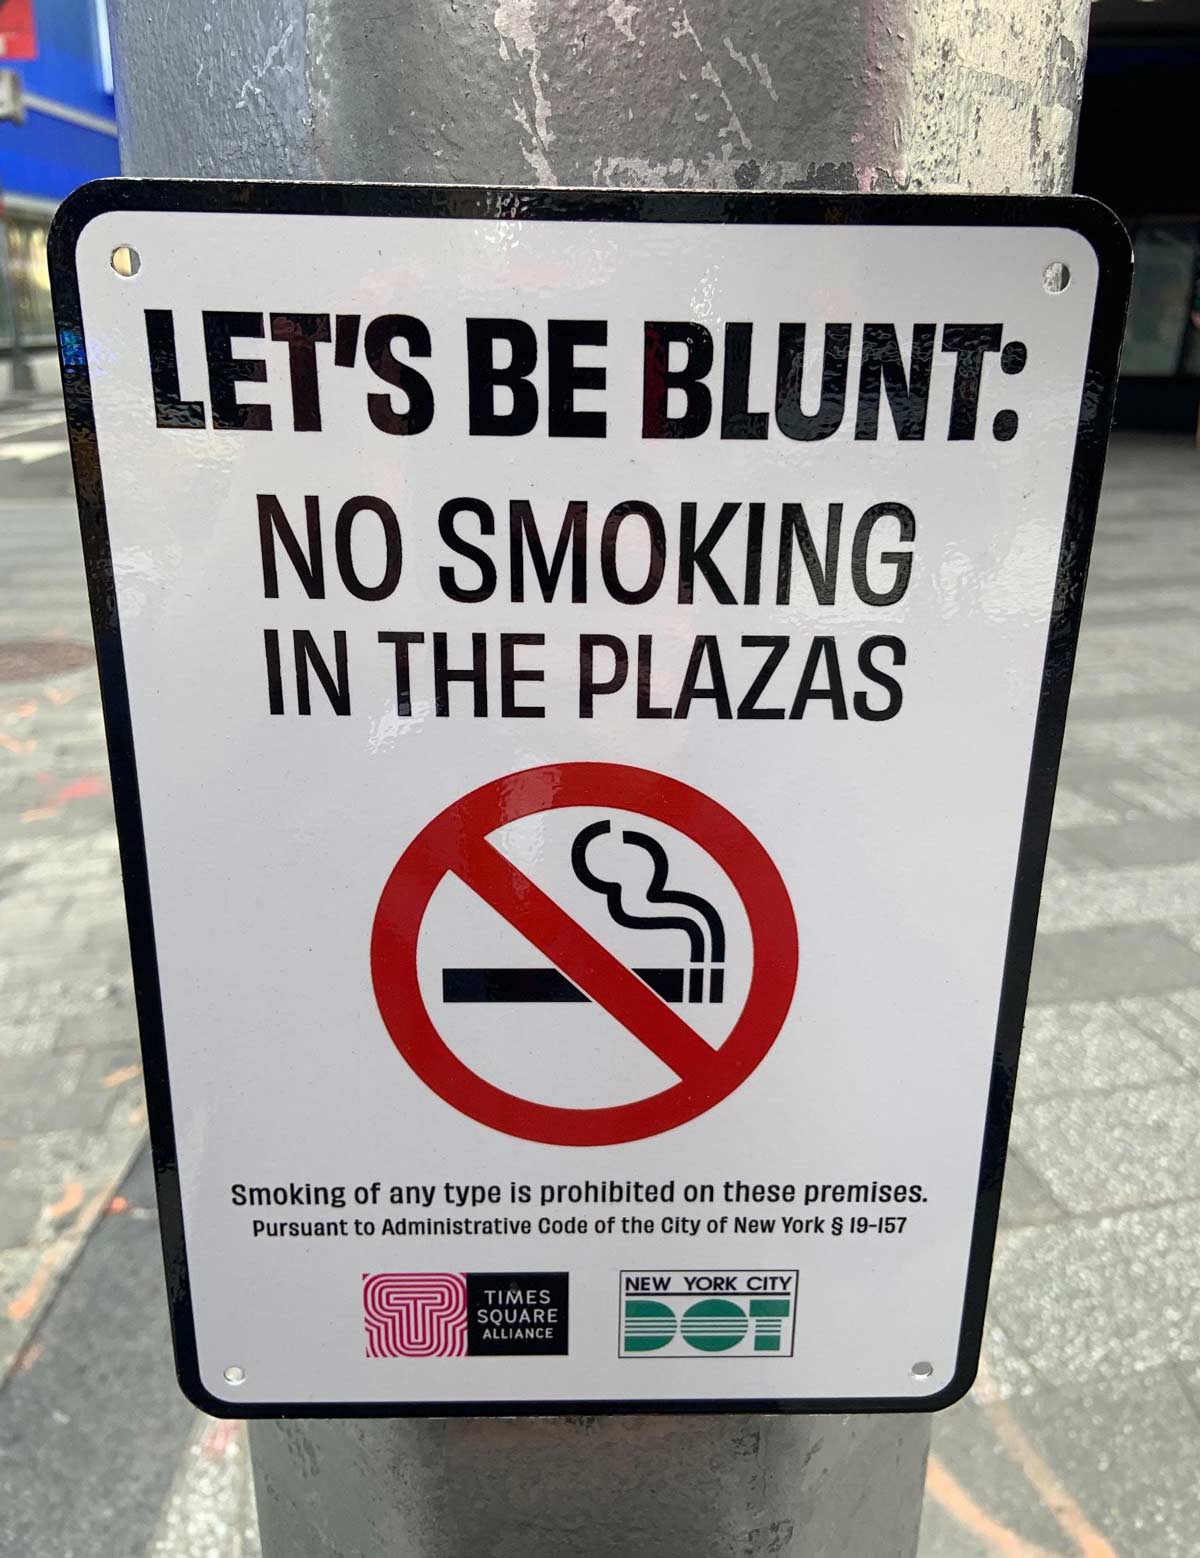 These signs were put up in NYC after weed became legal